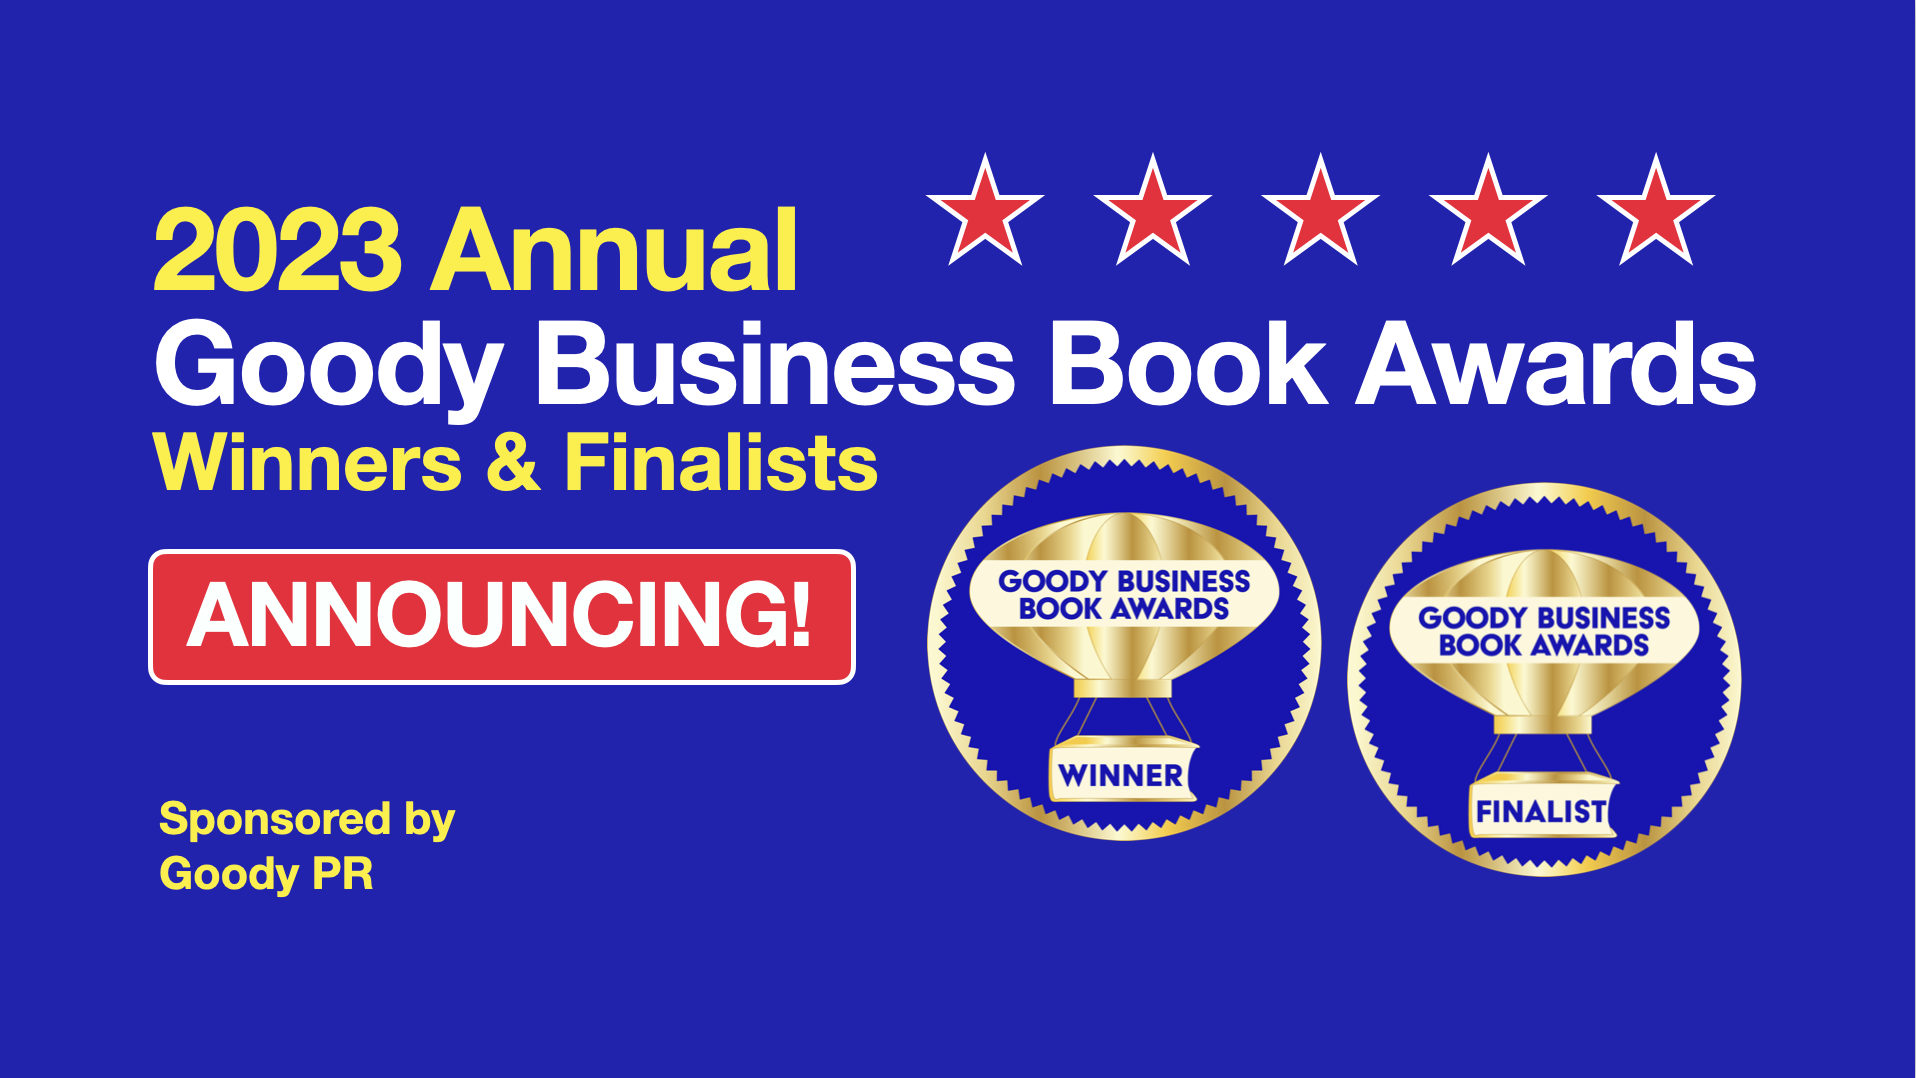 Announcing 2023 Goody Business Book Awards Winners and Finalists who are now Award-Winning Authors